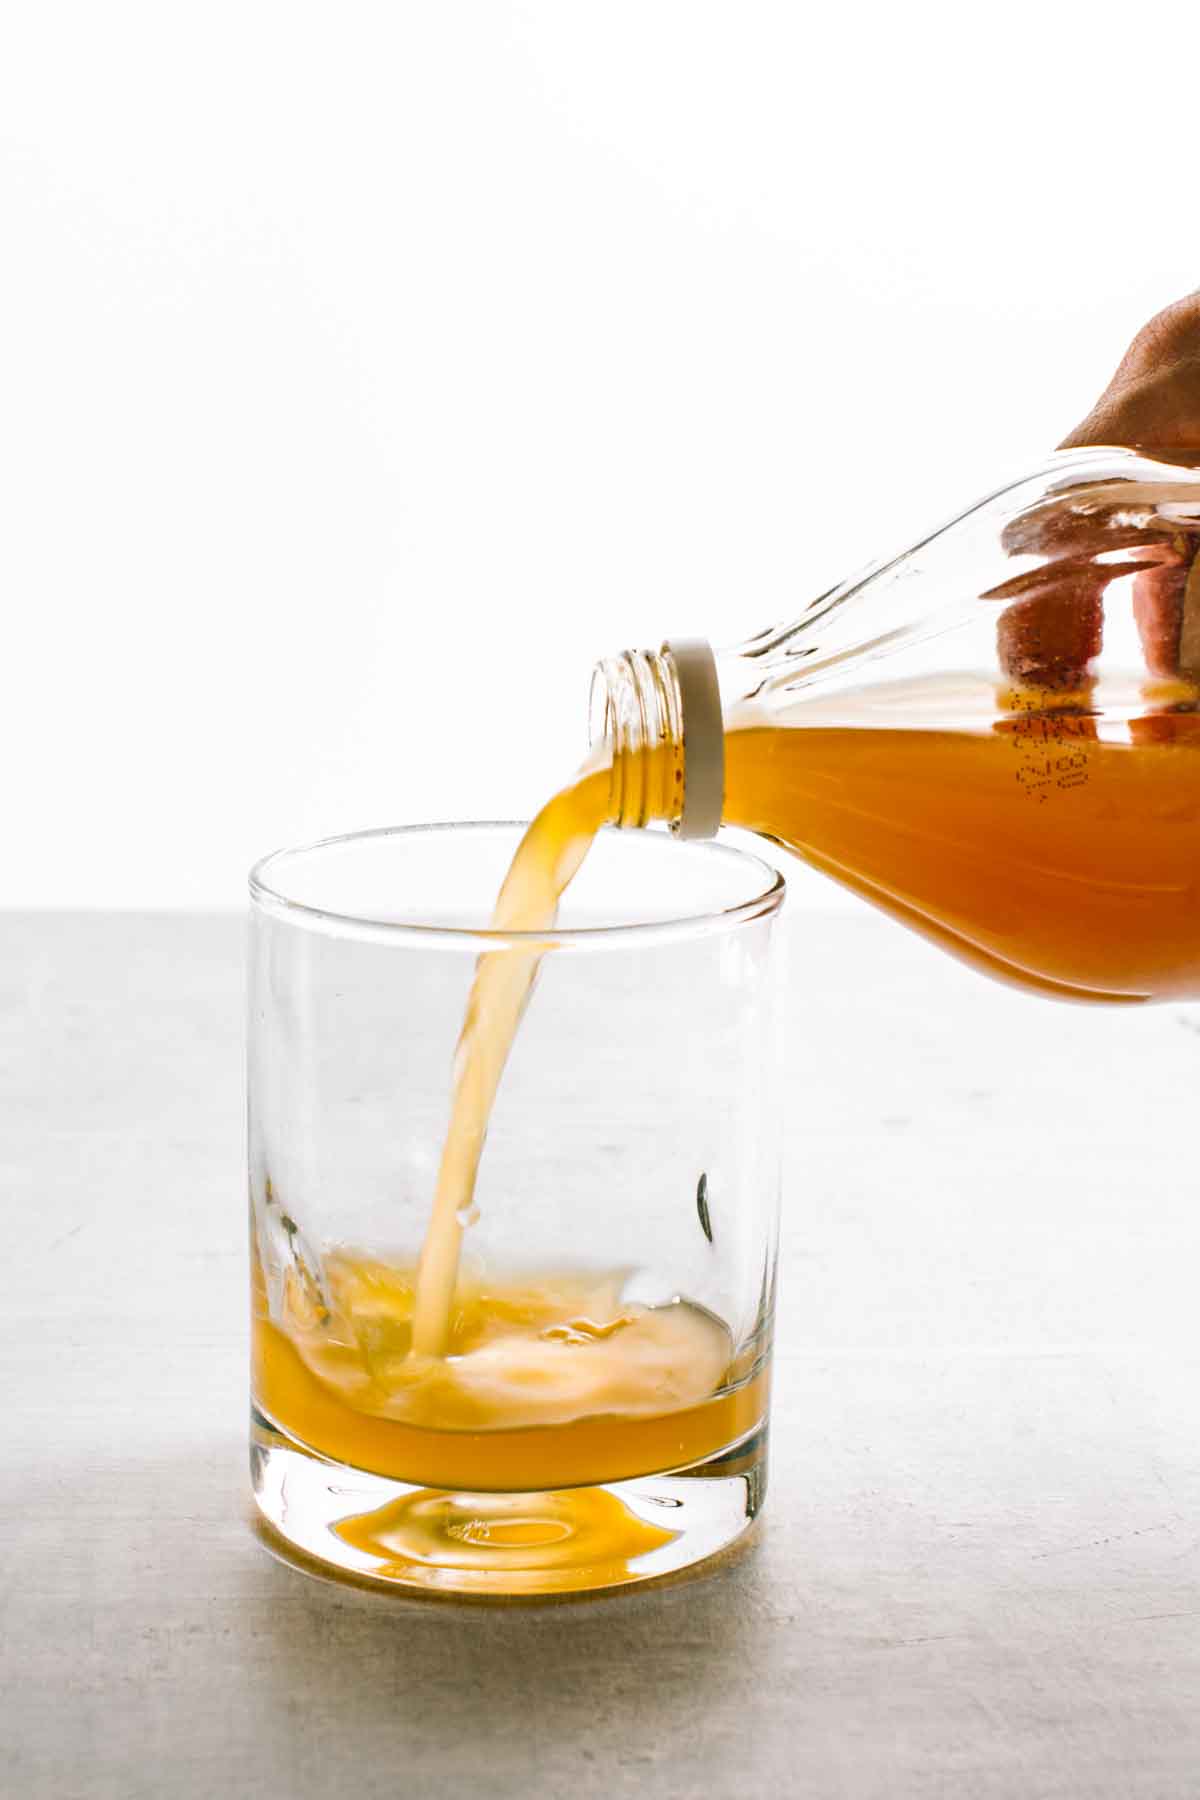 Pouring apple cider vinegar into a short clear glass.